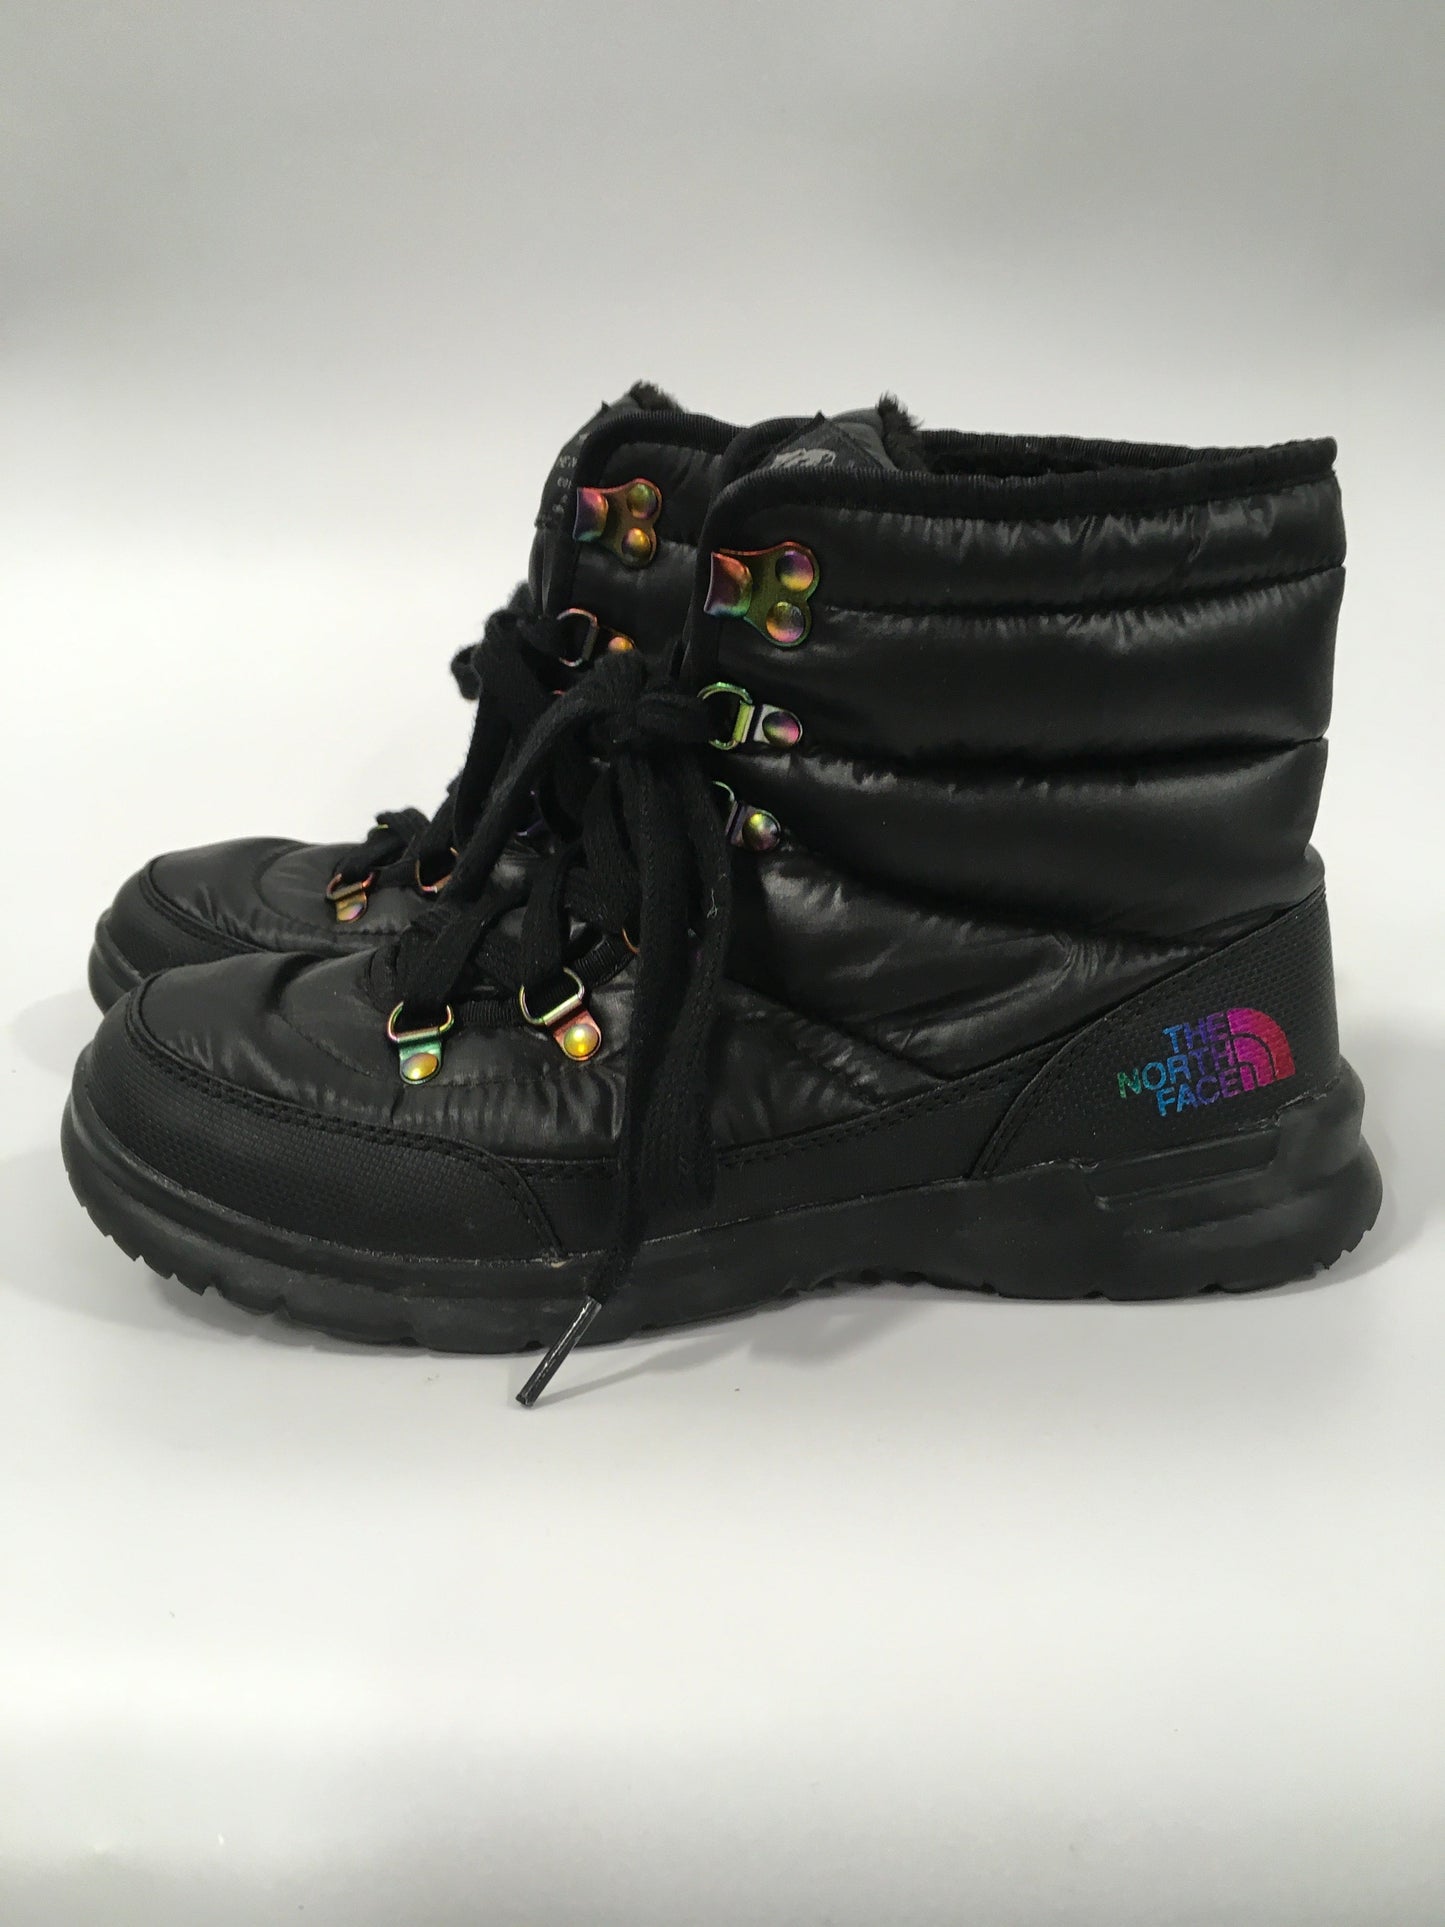 Black Boots Snow North Face, Size 7